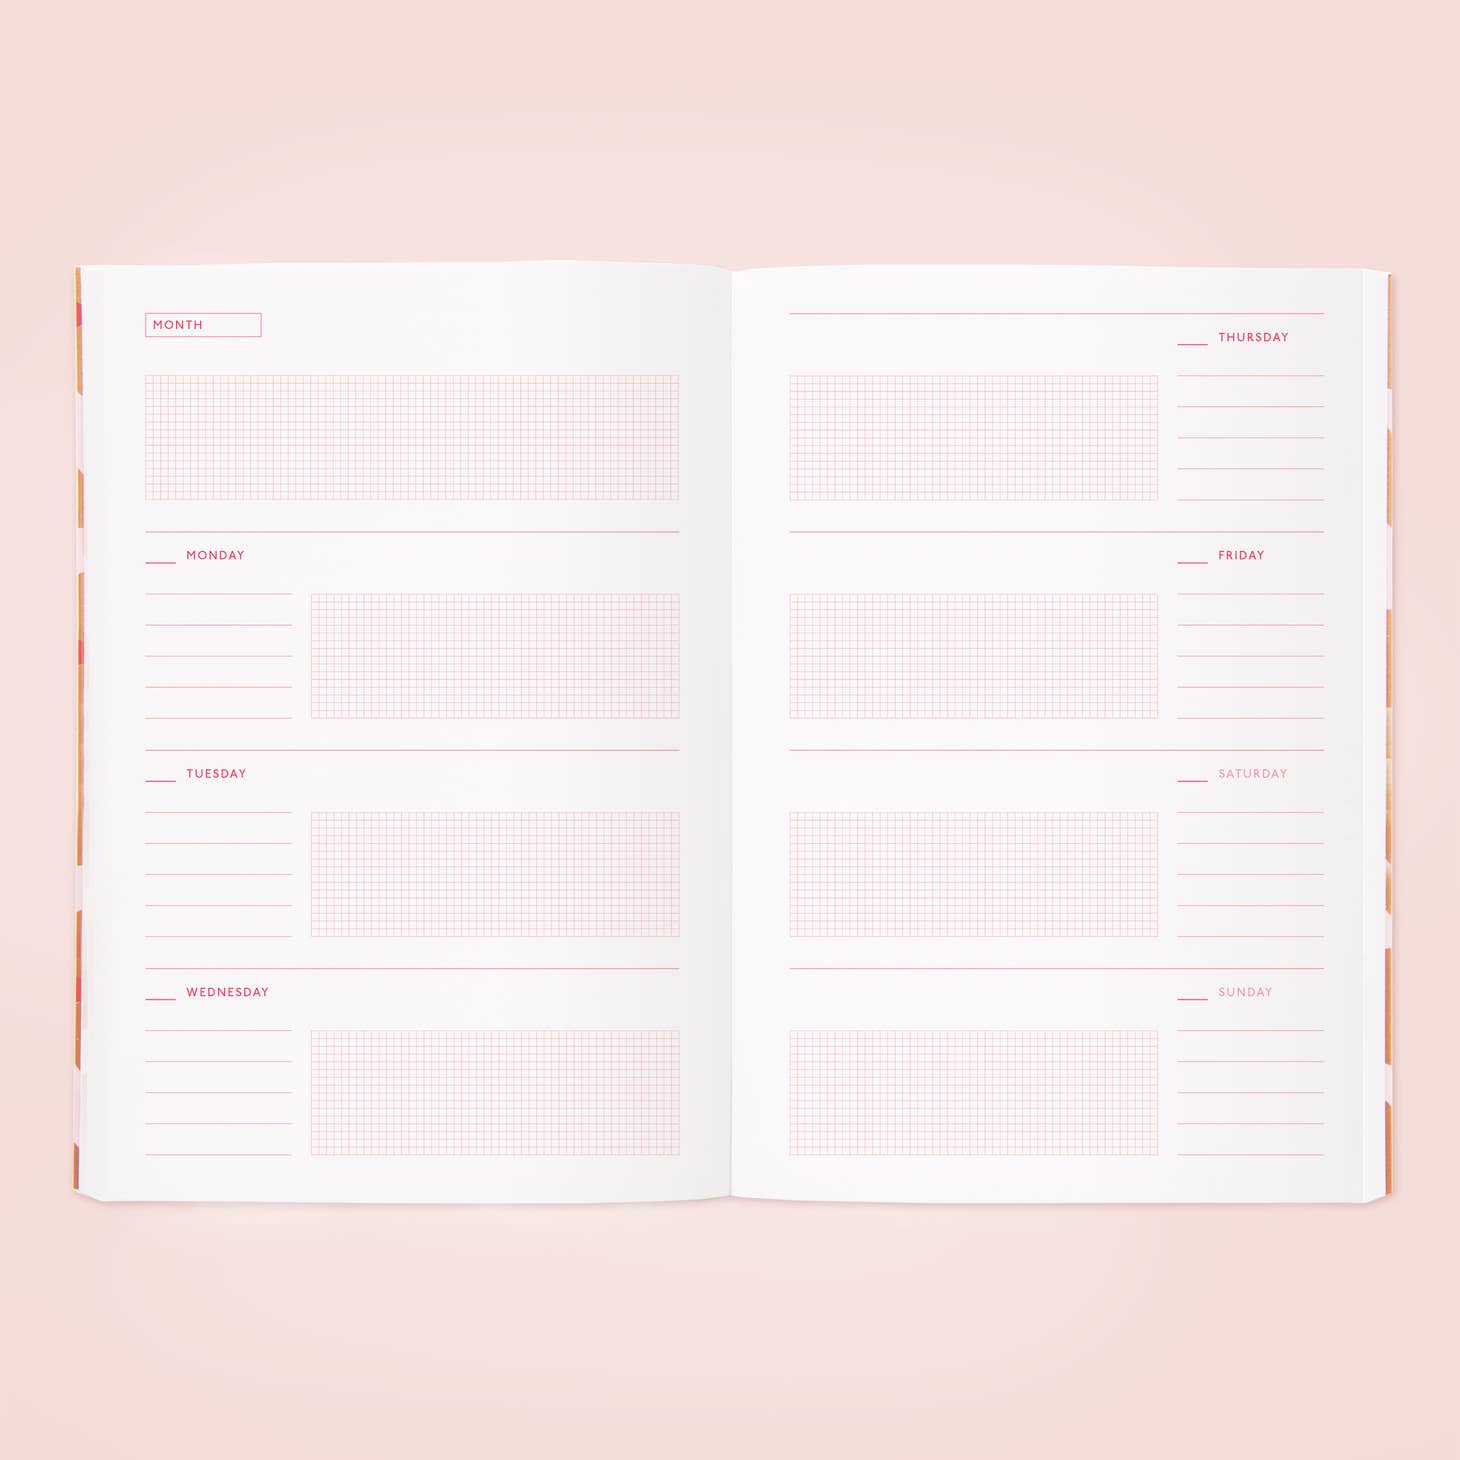 Image of month and daily page with lines and grid for each day in pink text.    